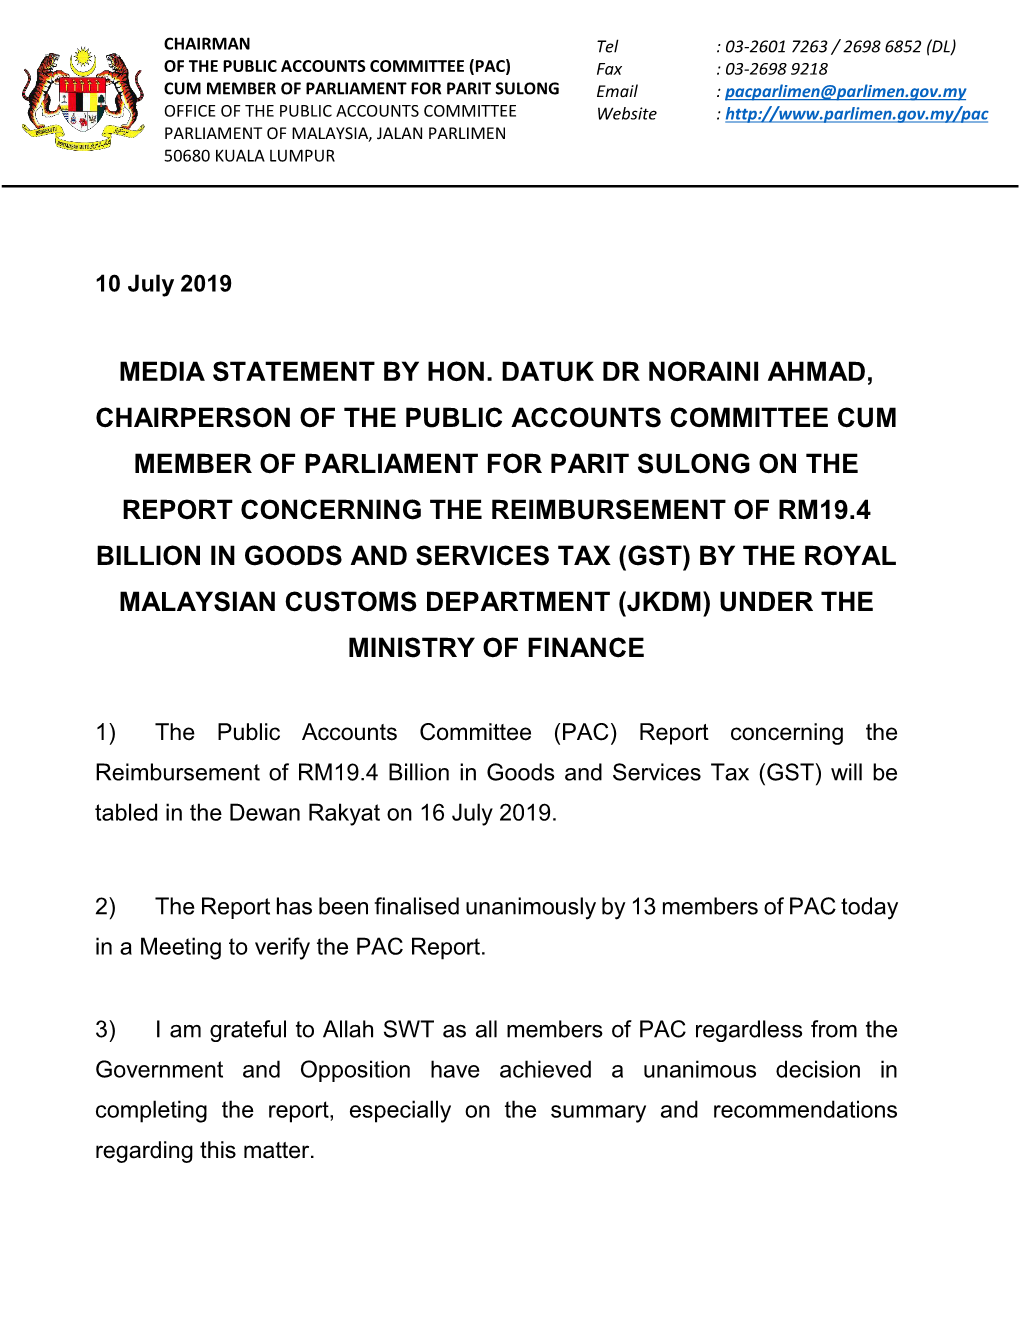 Media Statement by Hon. Datuk Dr Noraini Ahmad, Chairperson of the Public Accounts Committee Cum Member of Parliament for Parit